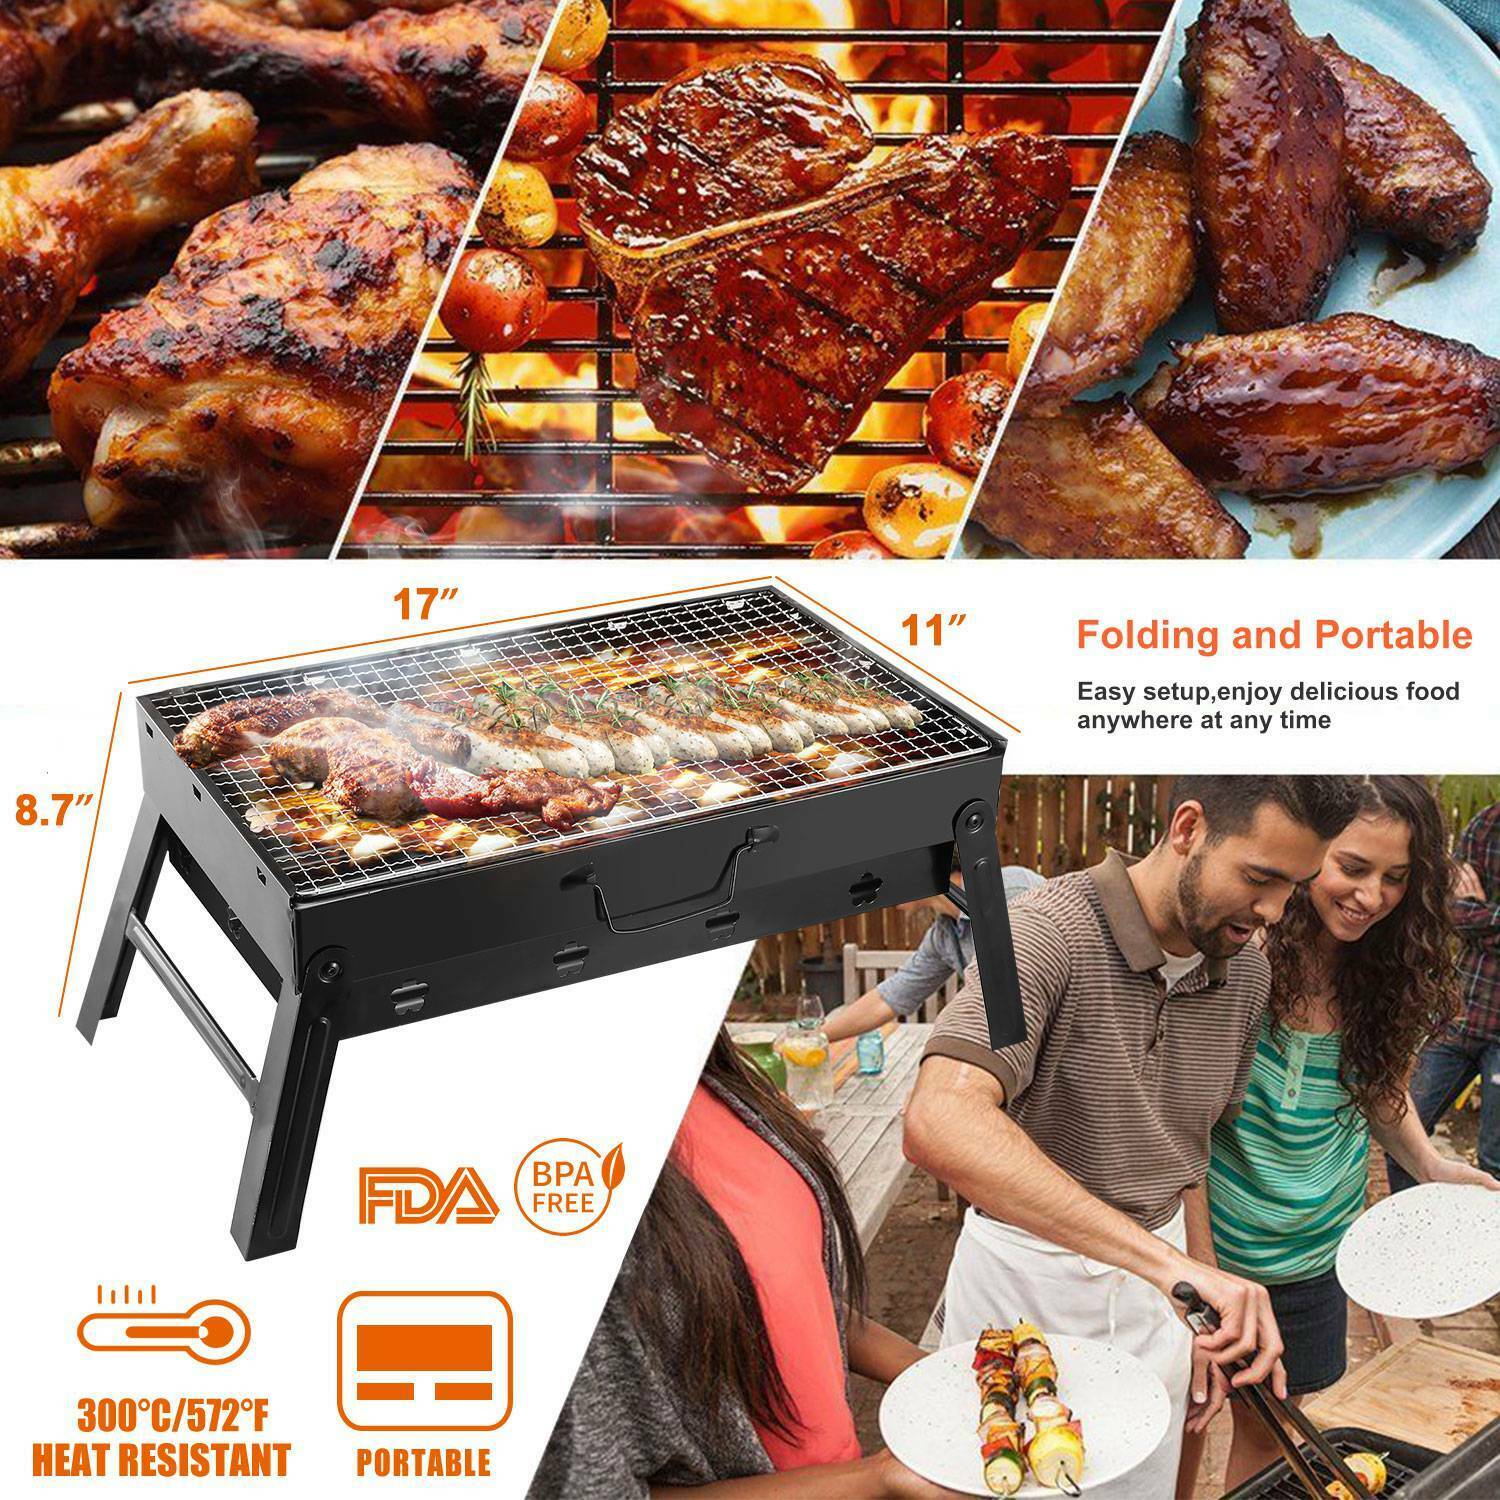 YouLoveIt Foldable BBQ Grill Camping Barbecue Smoker Portable Stainless Steel Smoker BBQ, Charcoal Grill for Picnic Garden Terrace Camping Travel, 17.7x11.0x8.7" - image 3 of 8